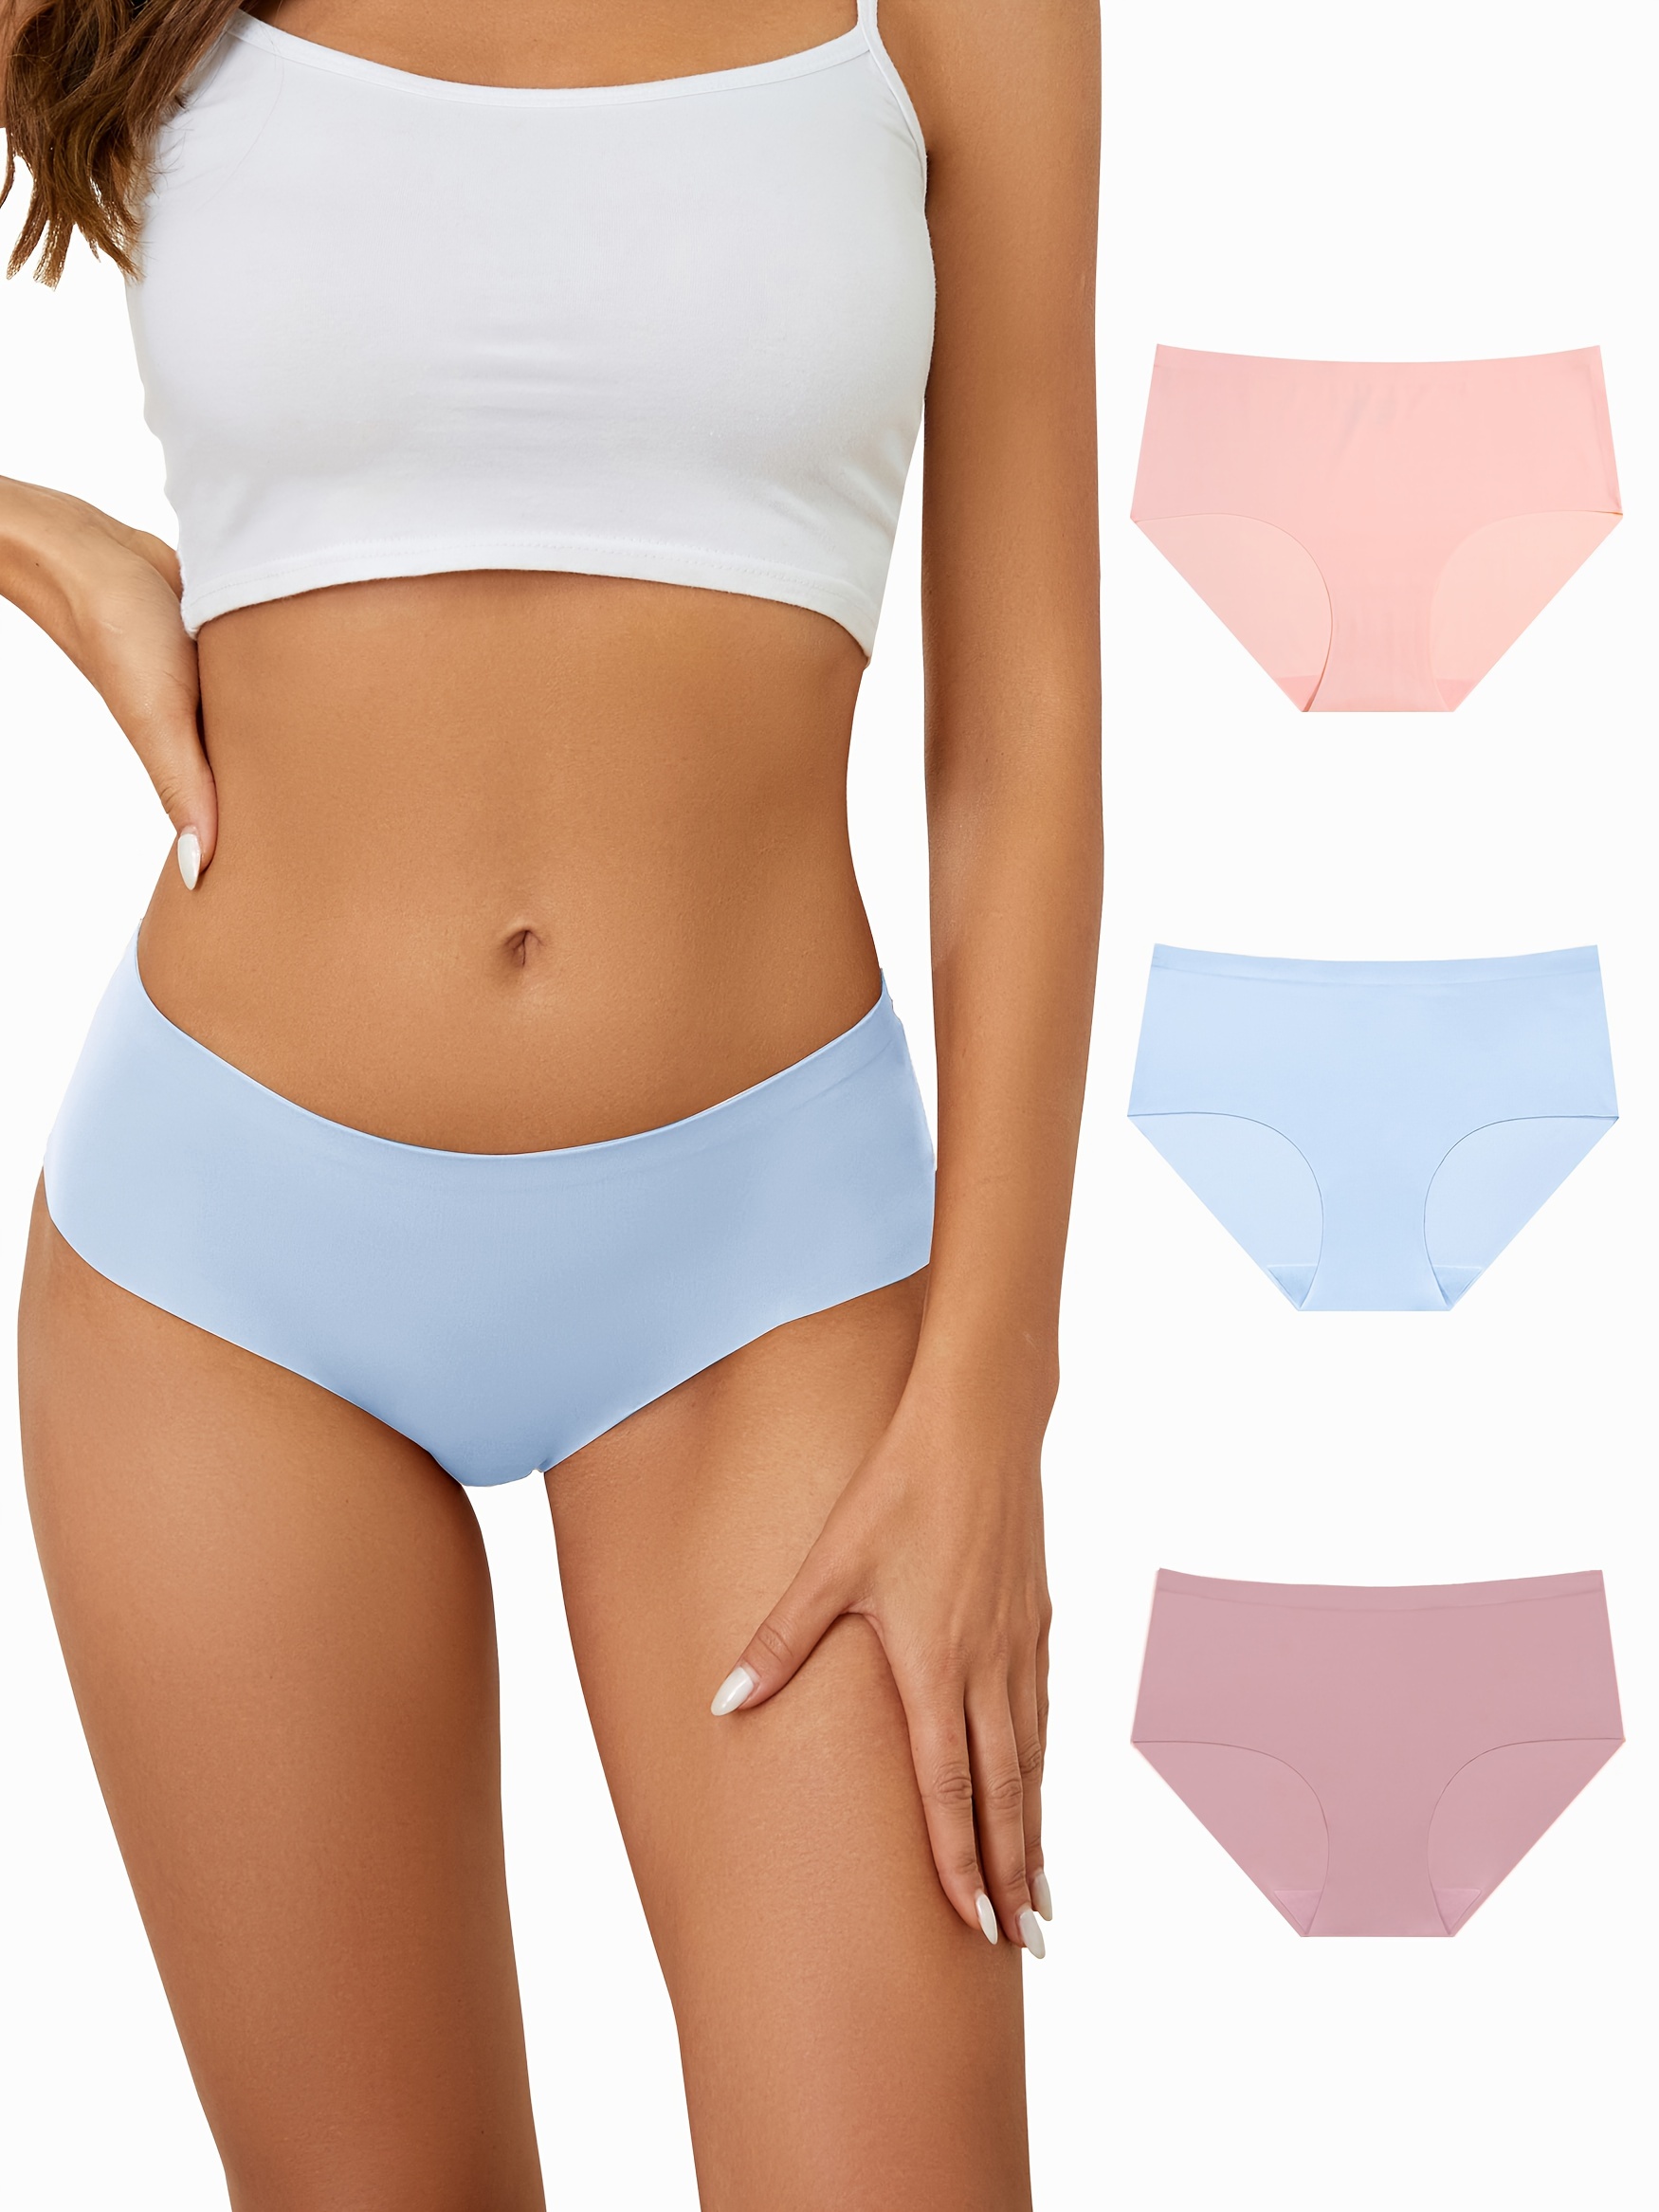 Women's Seamless Solid Color Panties (7pcs Triangle Briefs)